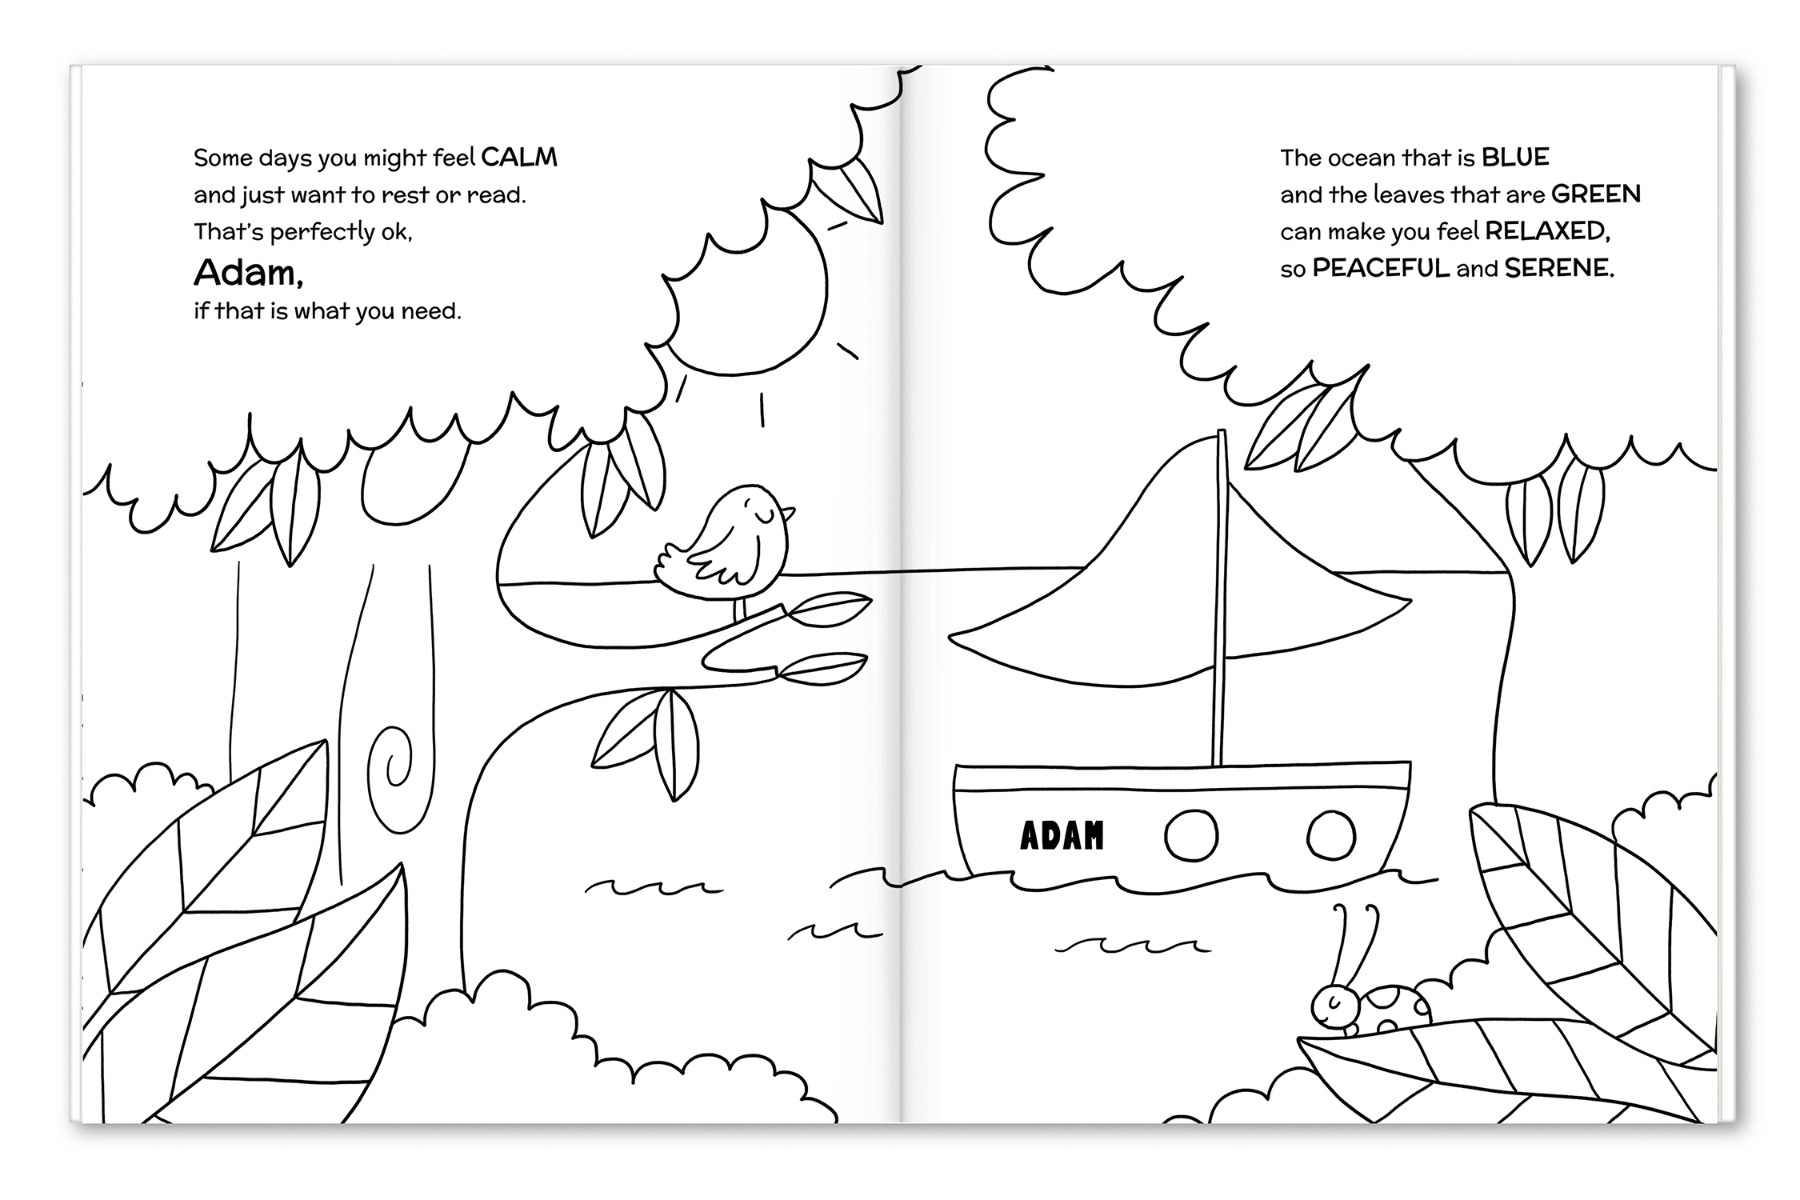 Personalized Coloring Book, adult coloring book, coloring book for adults,  custom coloring book, adult color book, all ages -gfy11019816